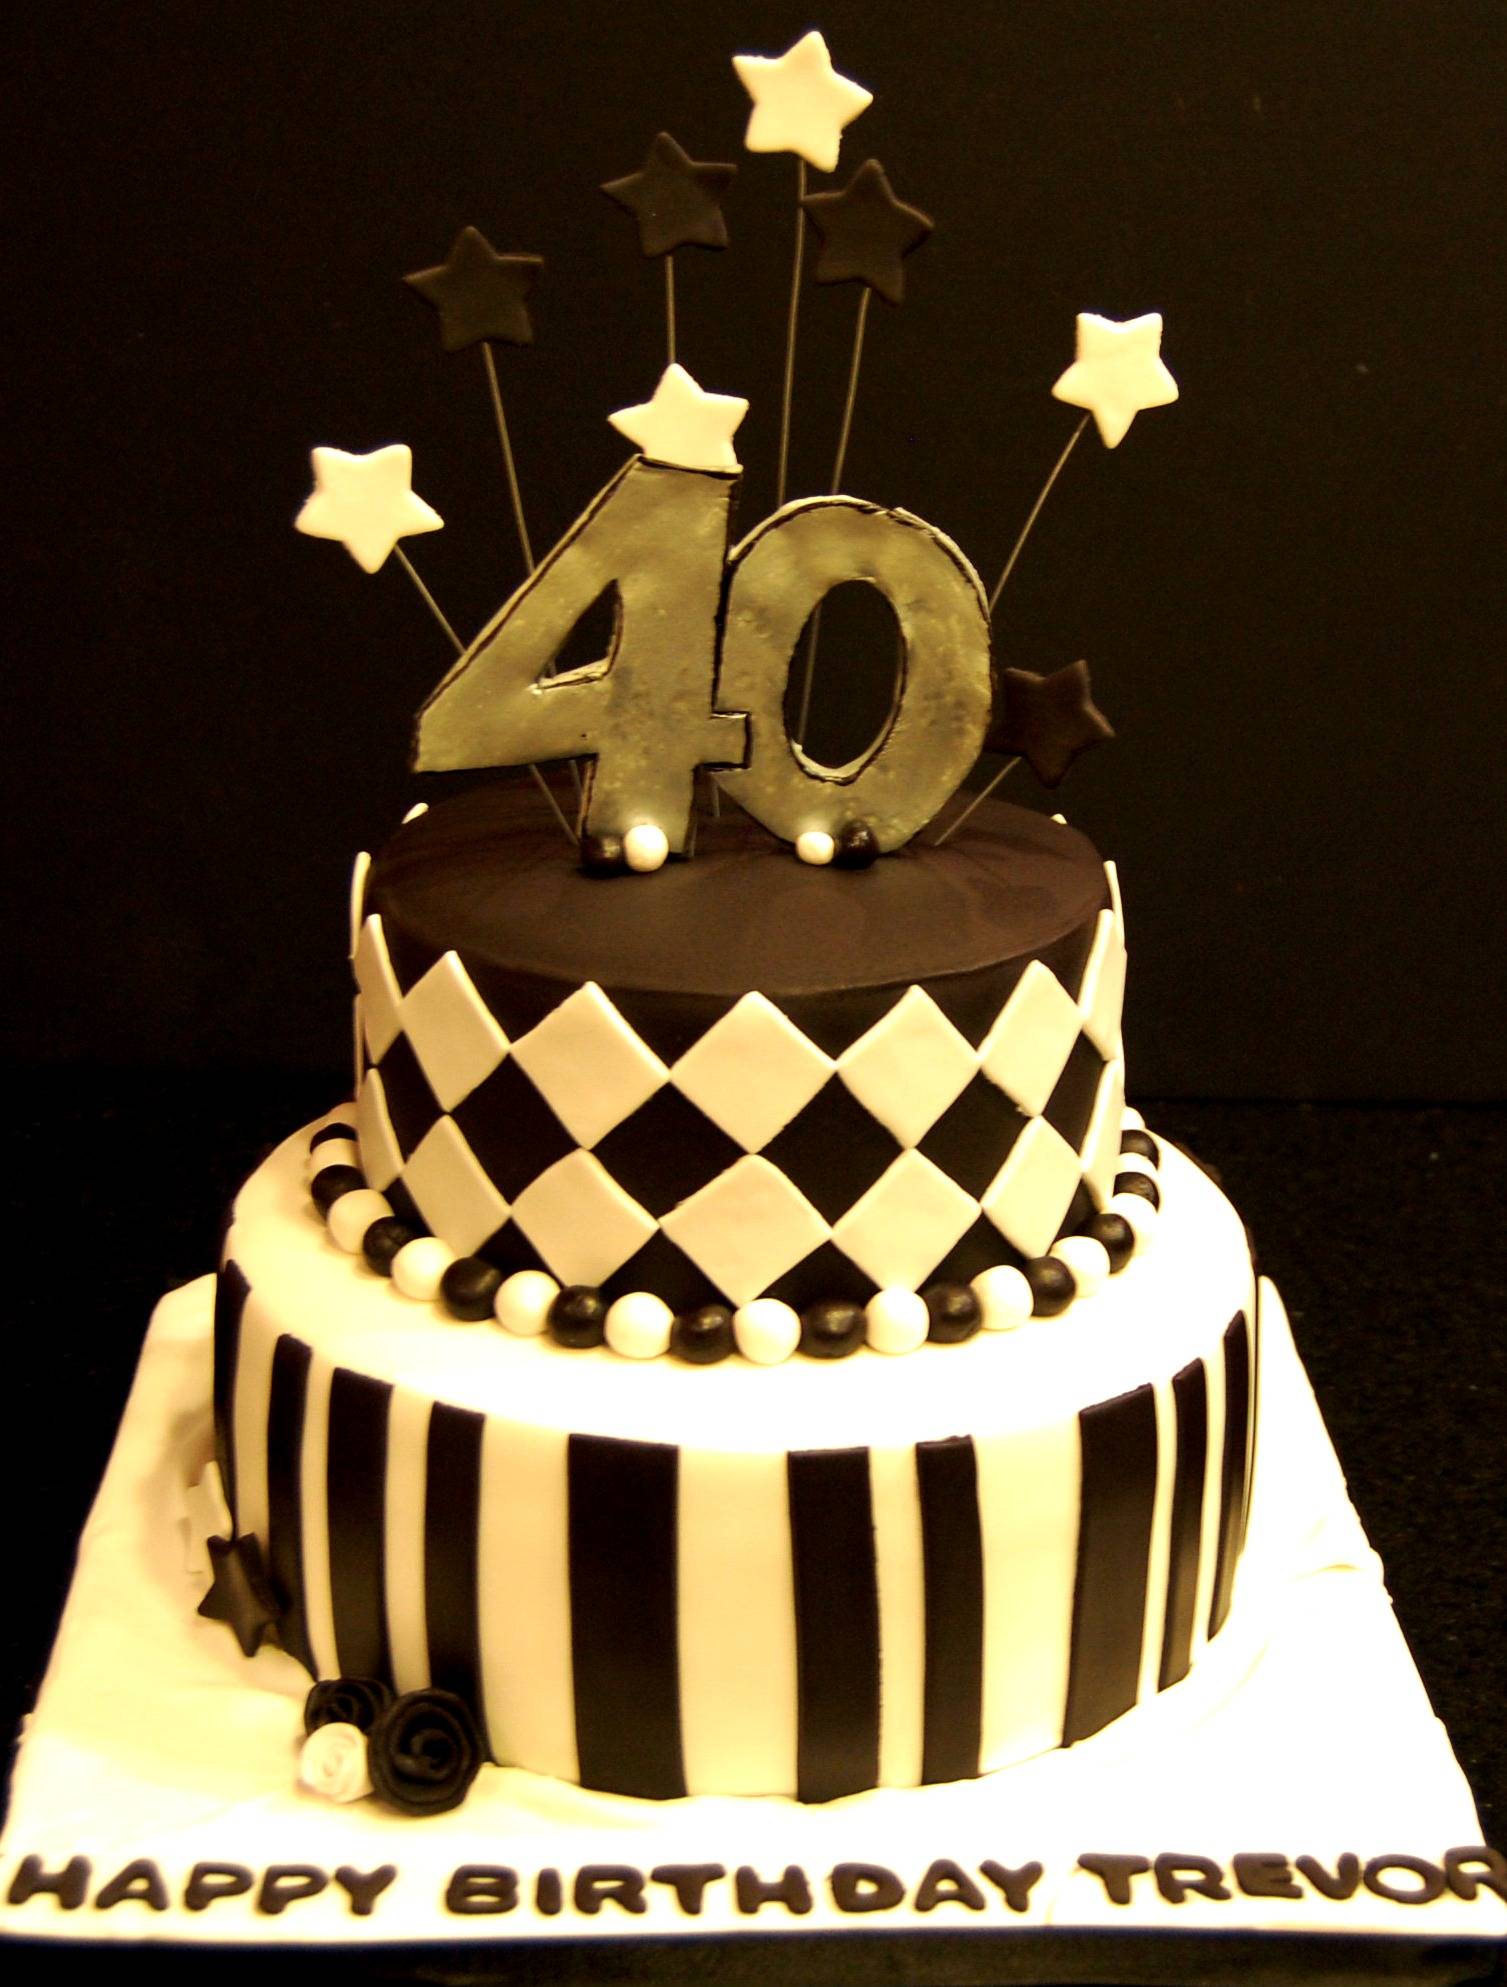 Black and white themed 40th bday cake